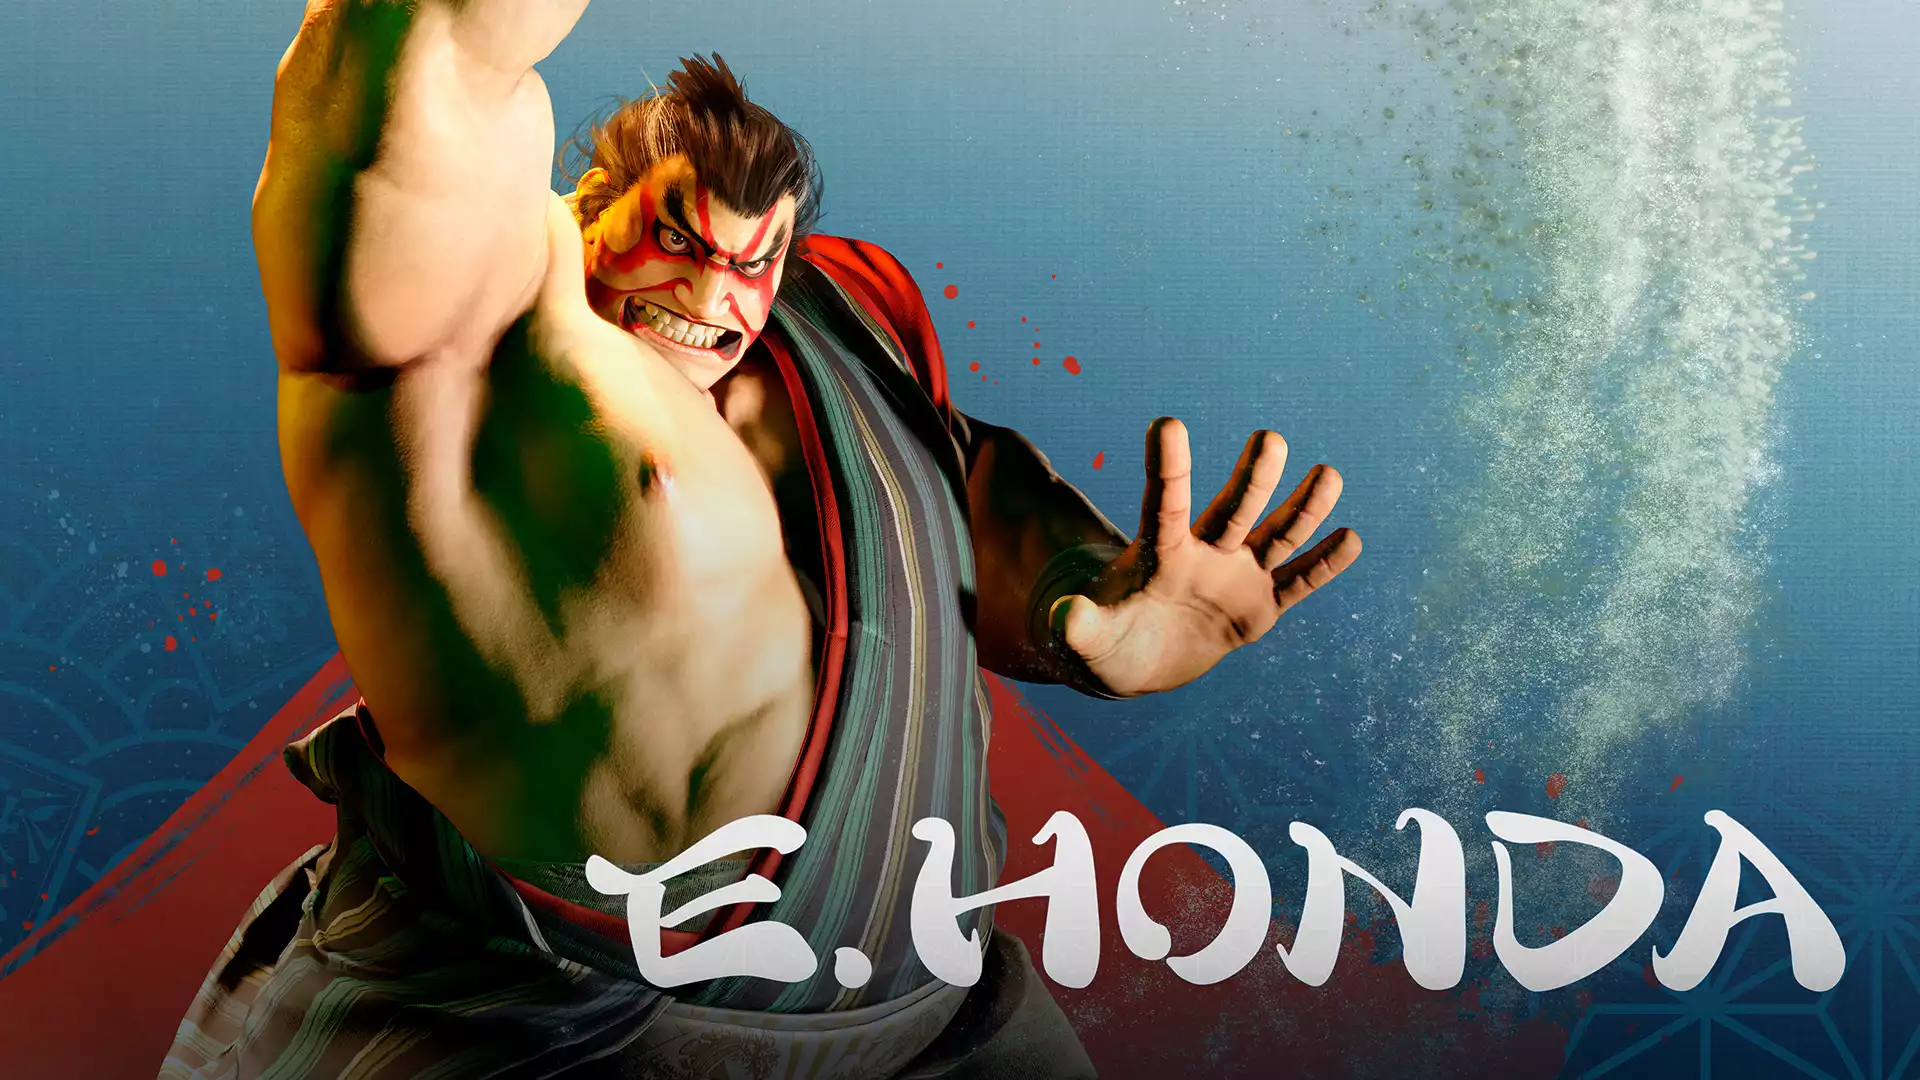 How to play E. Honda in Street Fighter 6